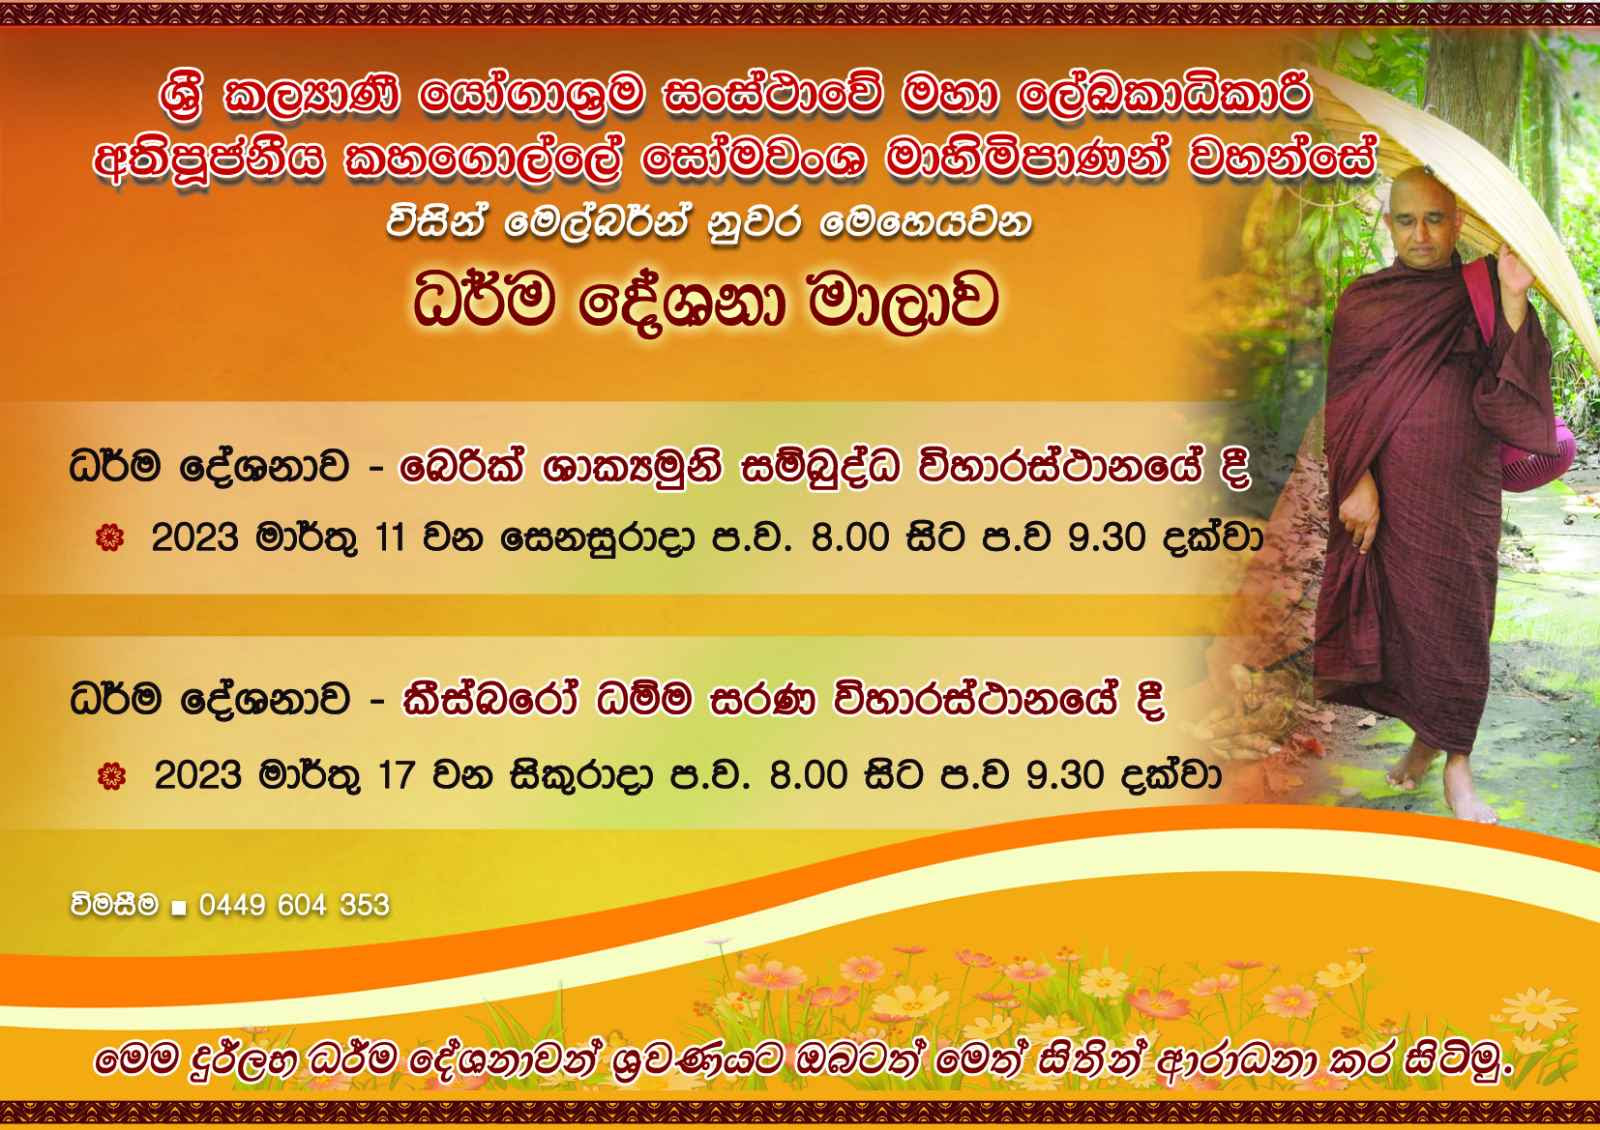 Special Dhamma Sermon conducted by Ven. Kahagolle Somawansa Thero